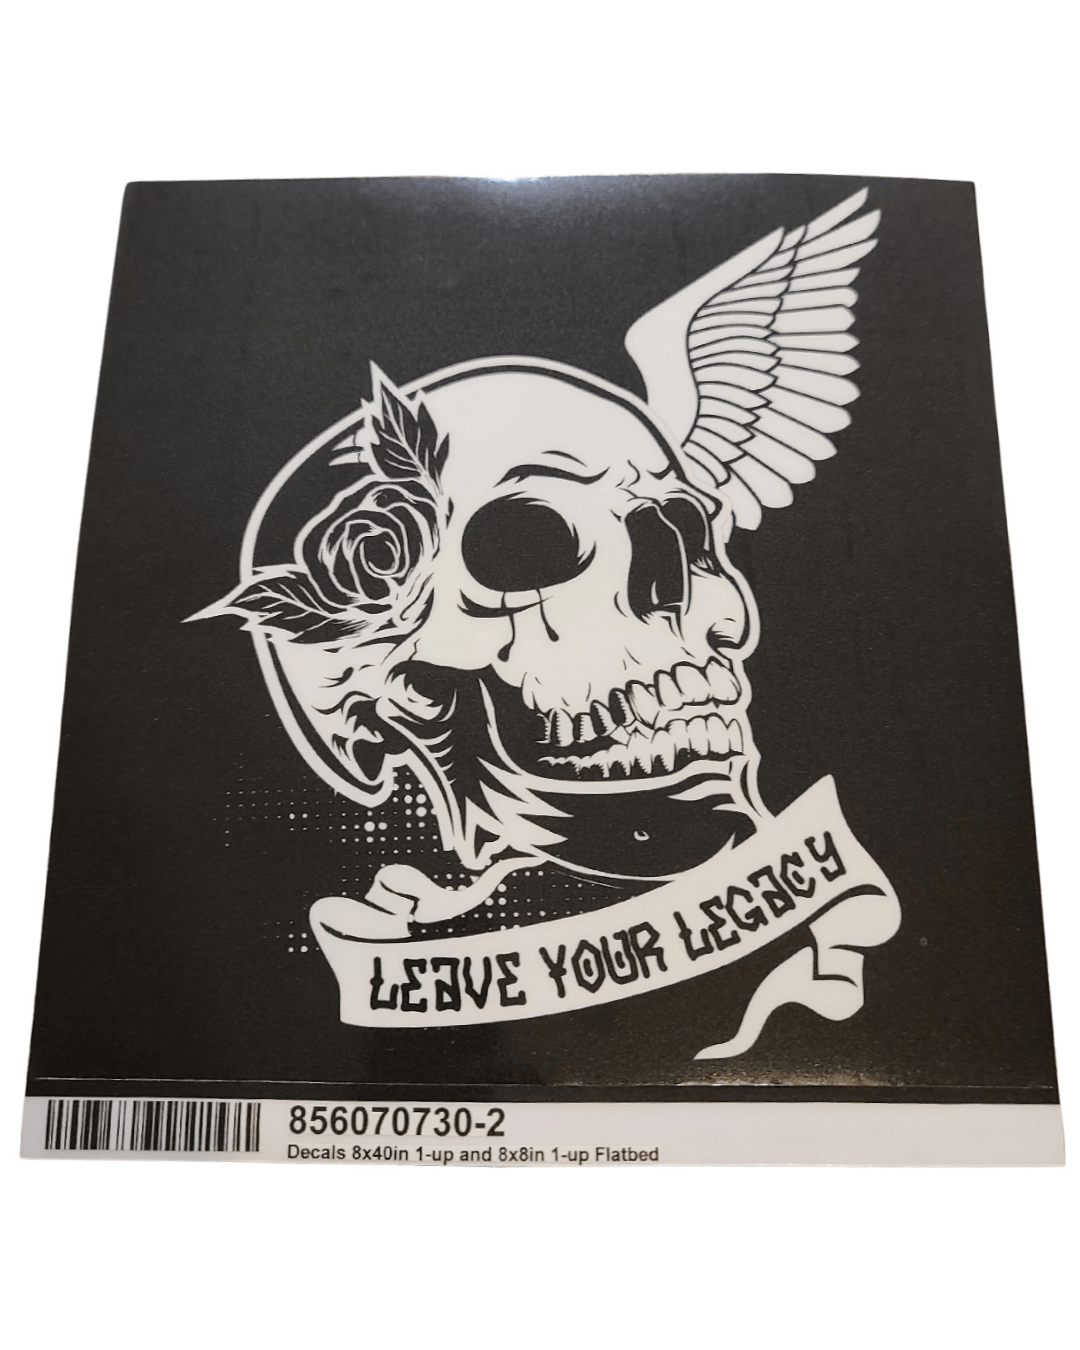 Window Decals - Leave Your Legacy Clothing